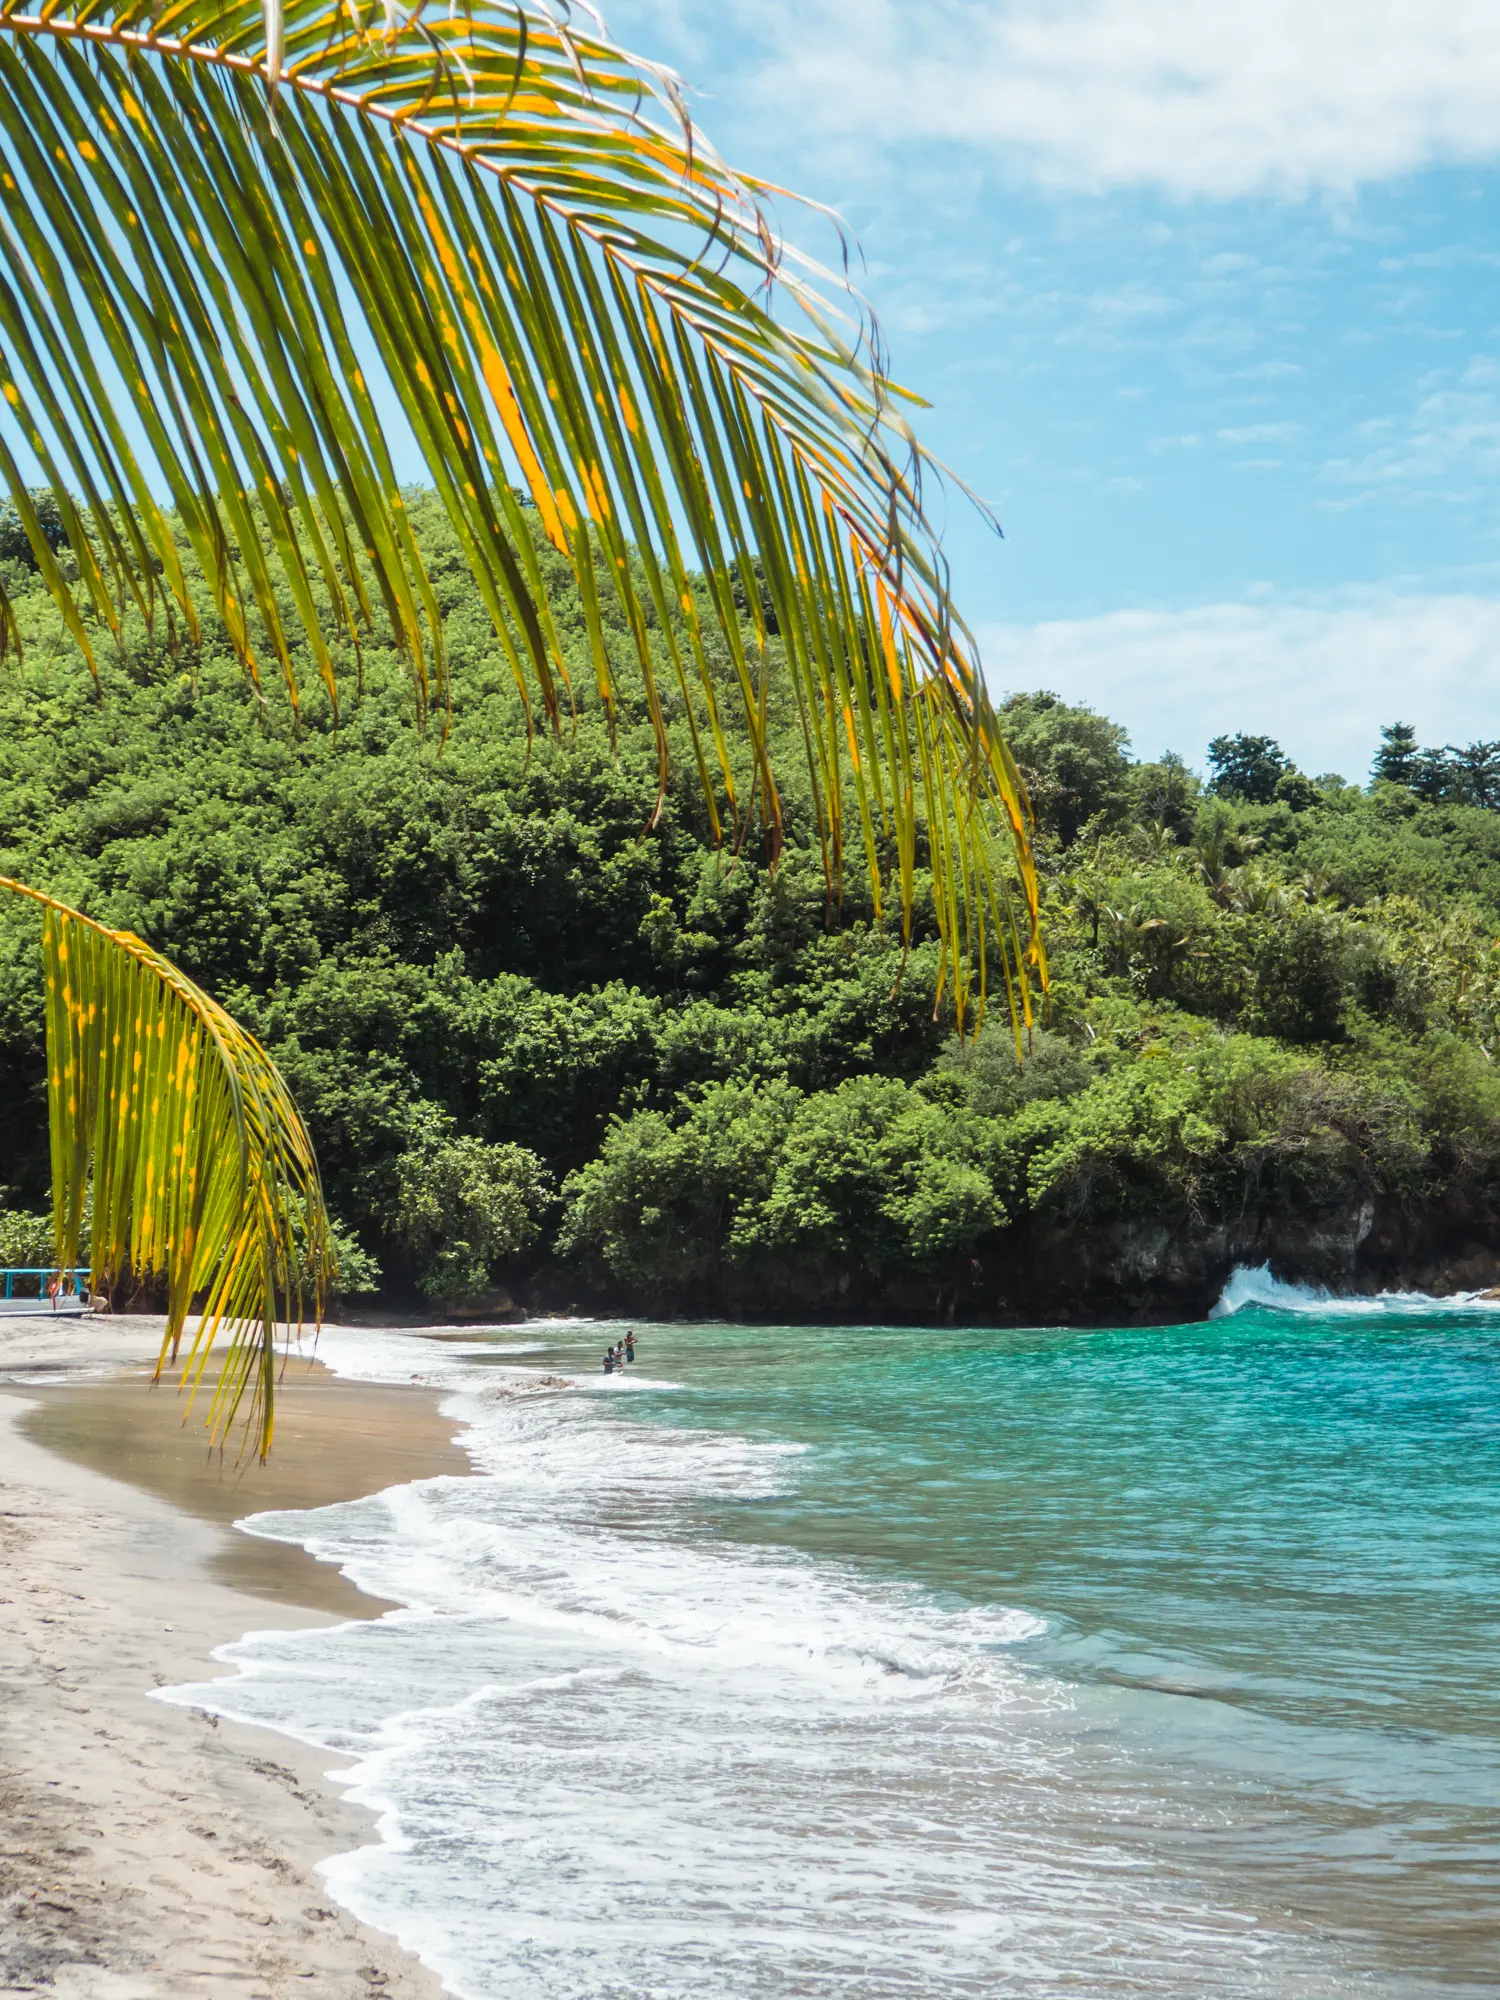 Palm tree leaf over the light sand and turquoise water at Crystal Bay, one of the main reasons to visit Nusa Penida.